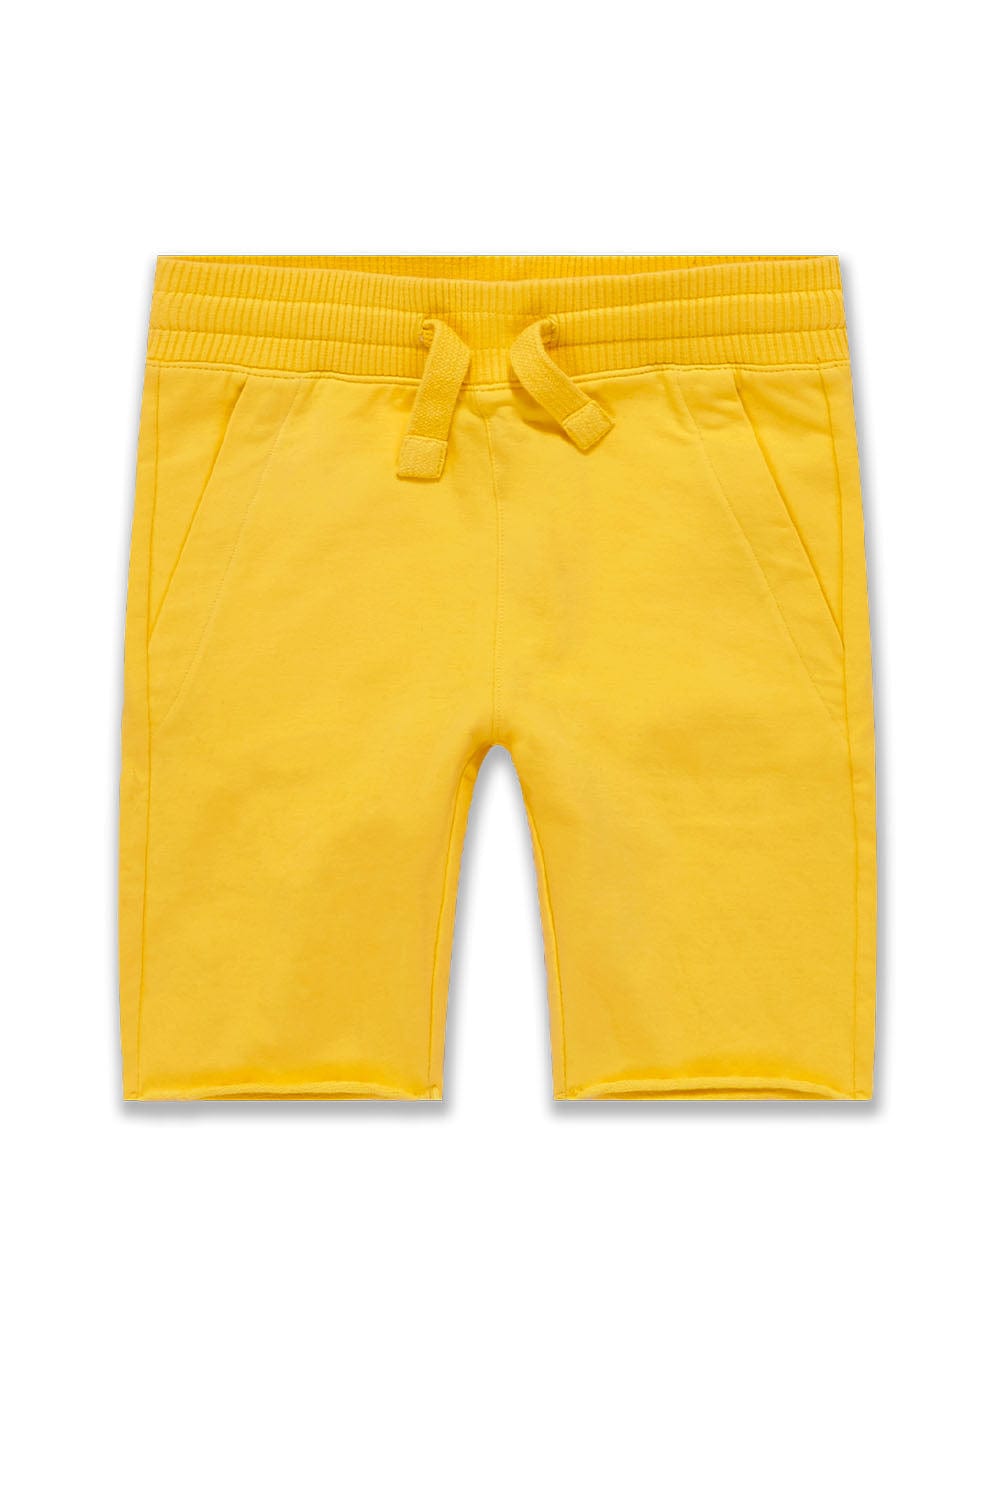 JC Kids Kids Palma French Terry Shorts (Exclusive) (Memorial Day Markdown) Slicker Yellow / 2